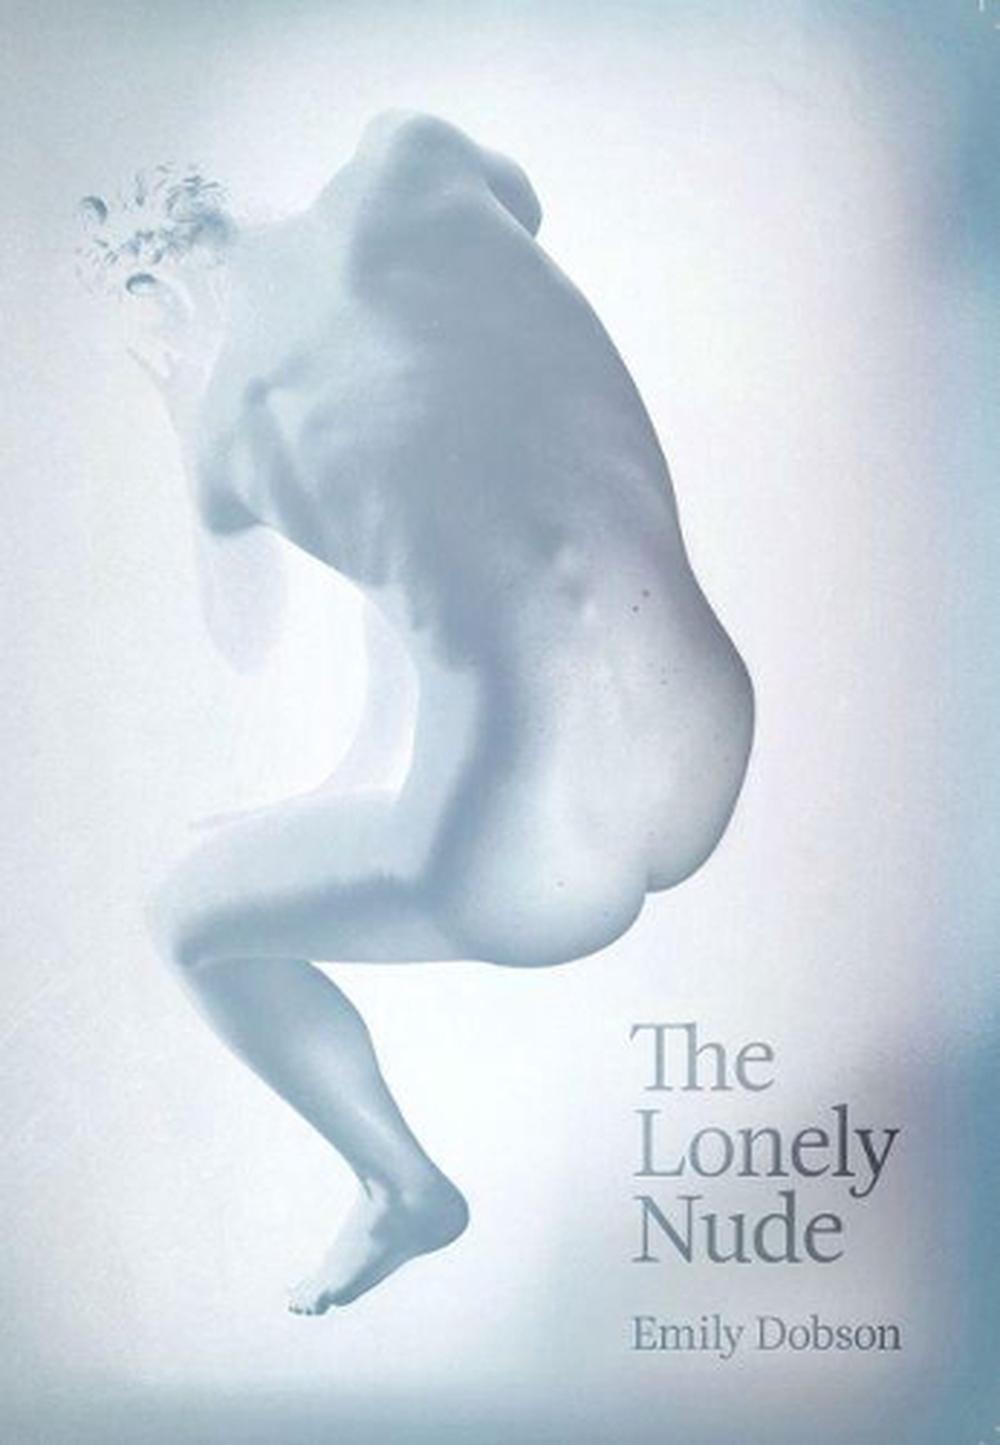 The Lonely Nude by Emily Dobson, Paperback, 9780864739292 | Buy online at  The Nile